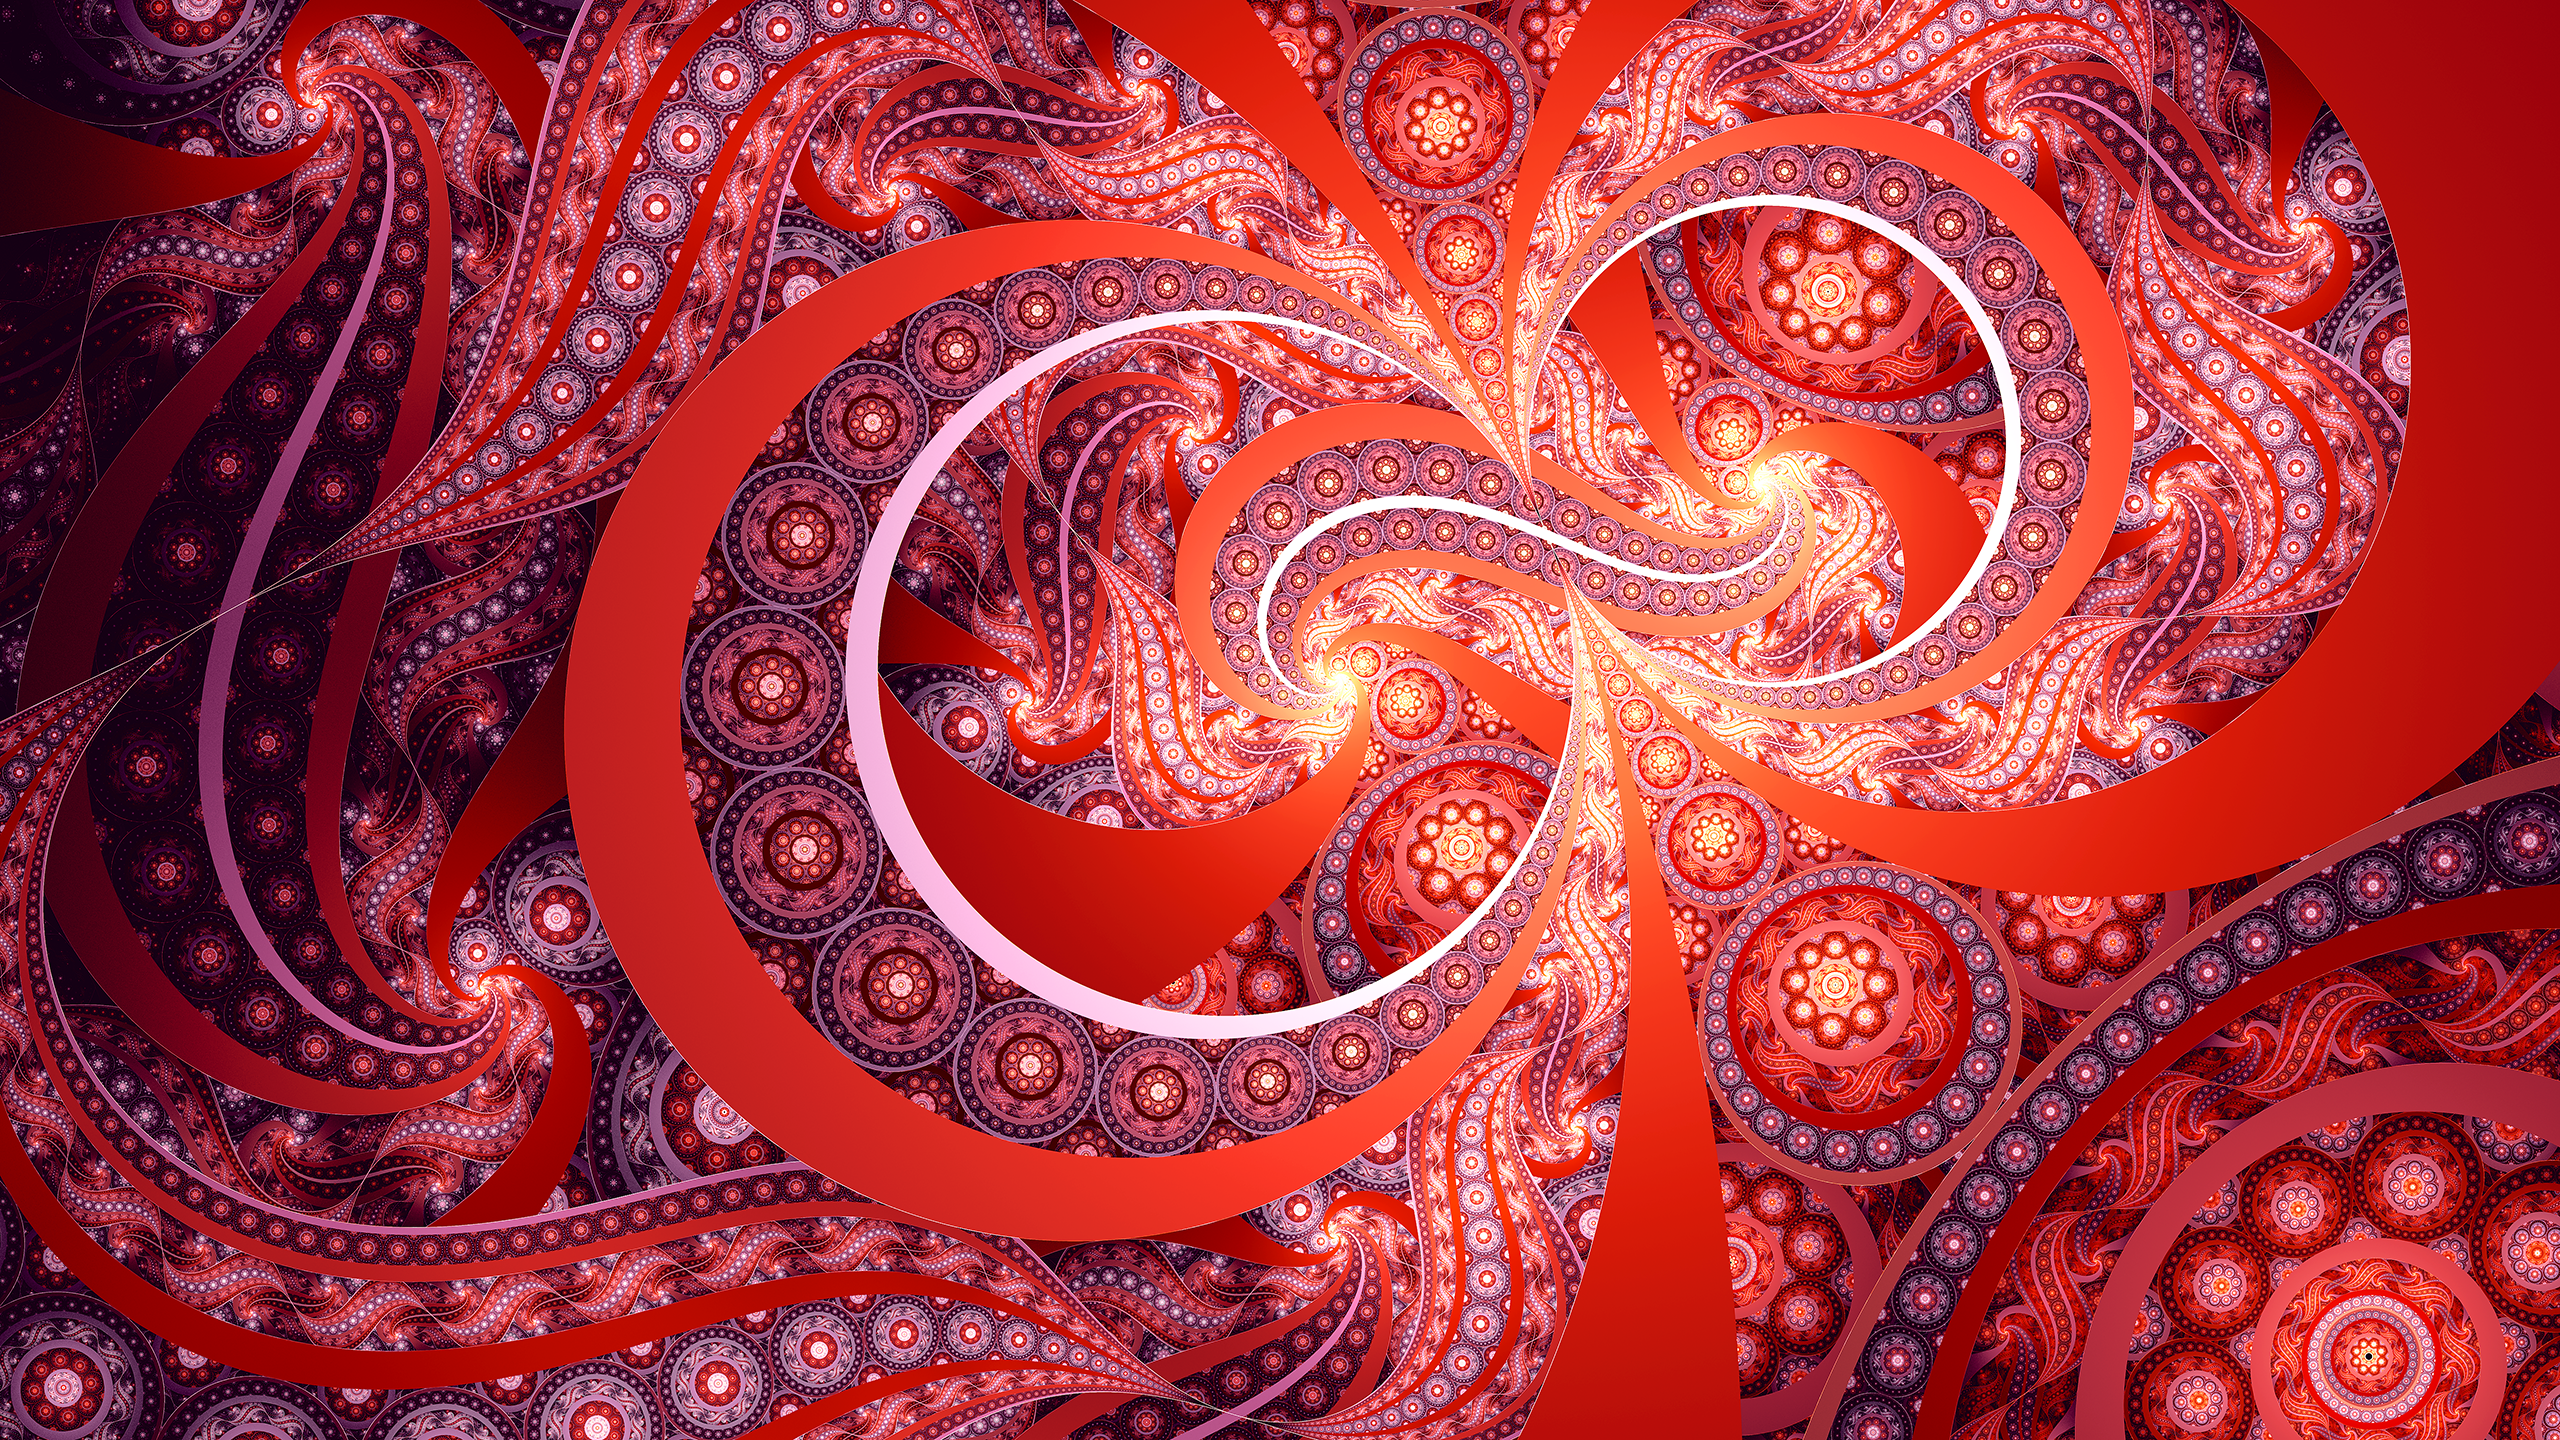 Abstract Fractal 2560x1440